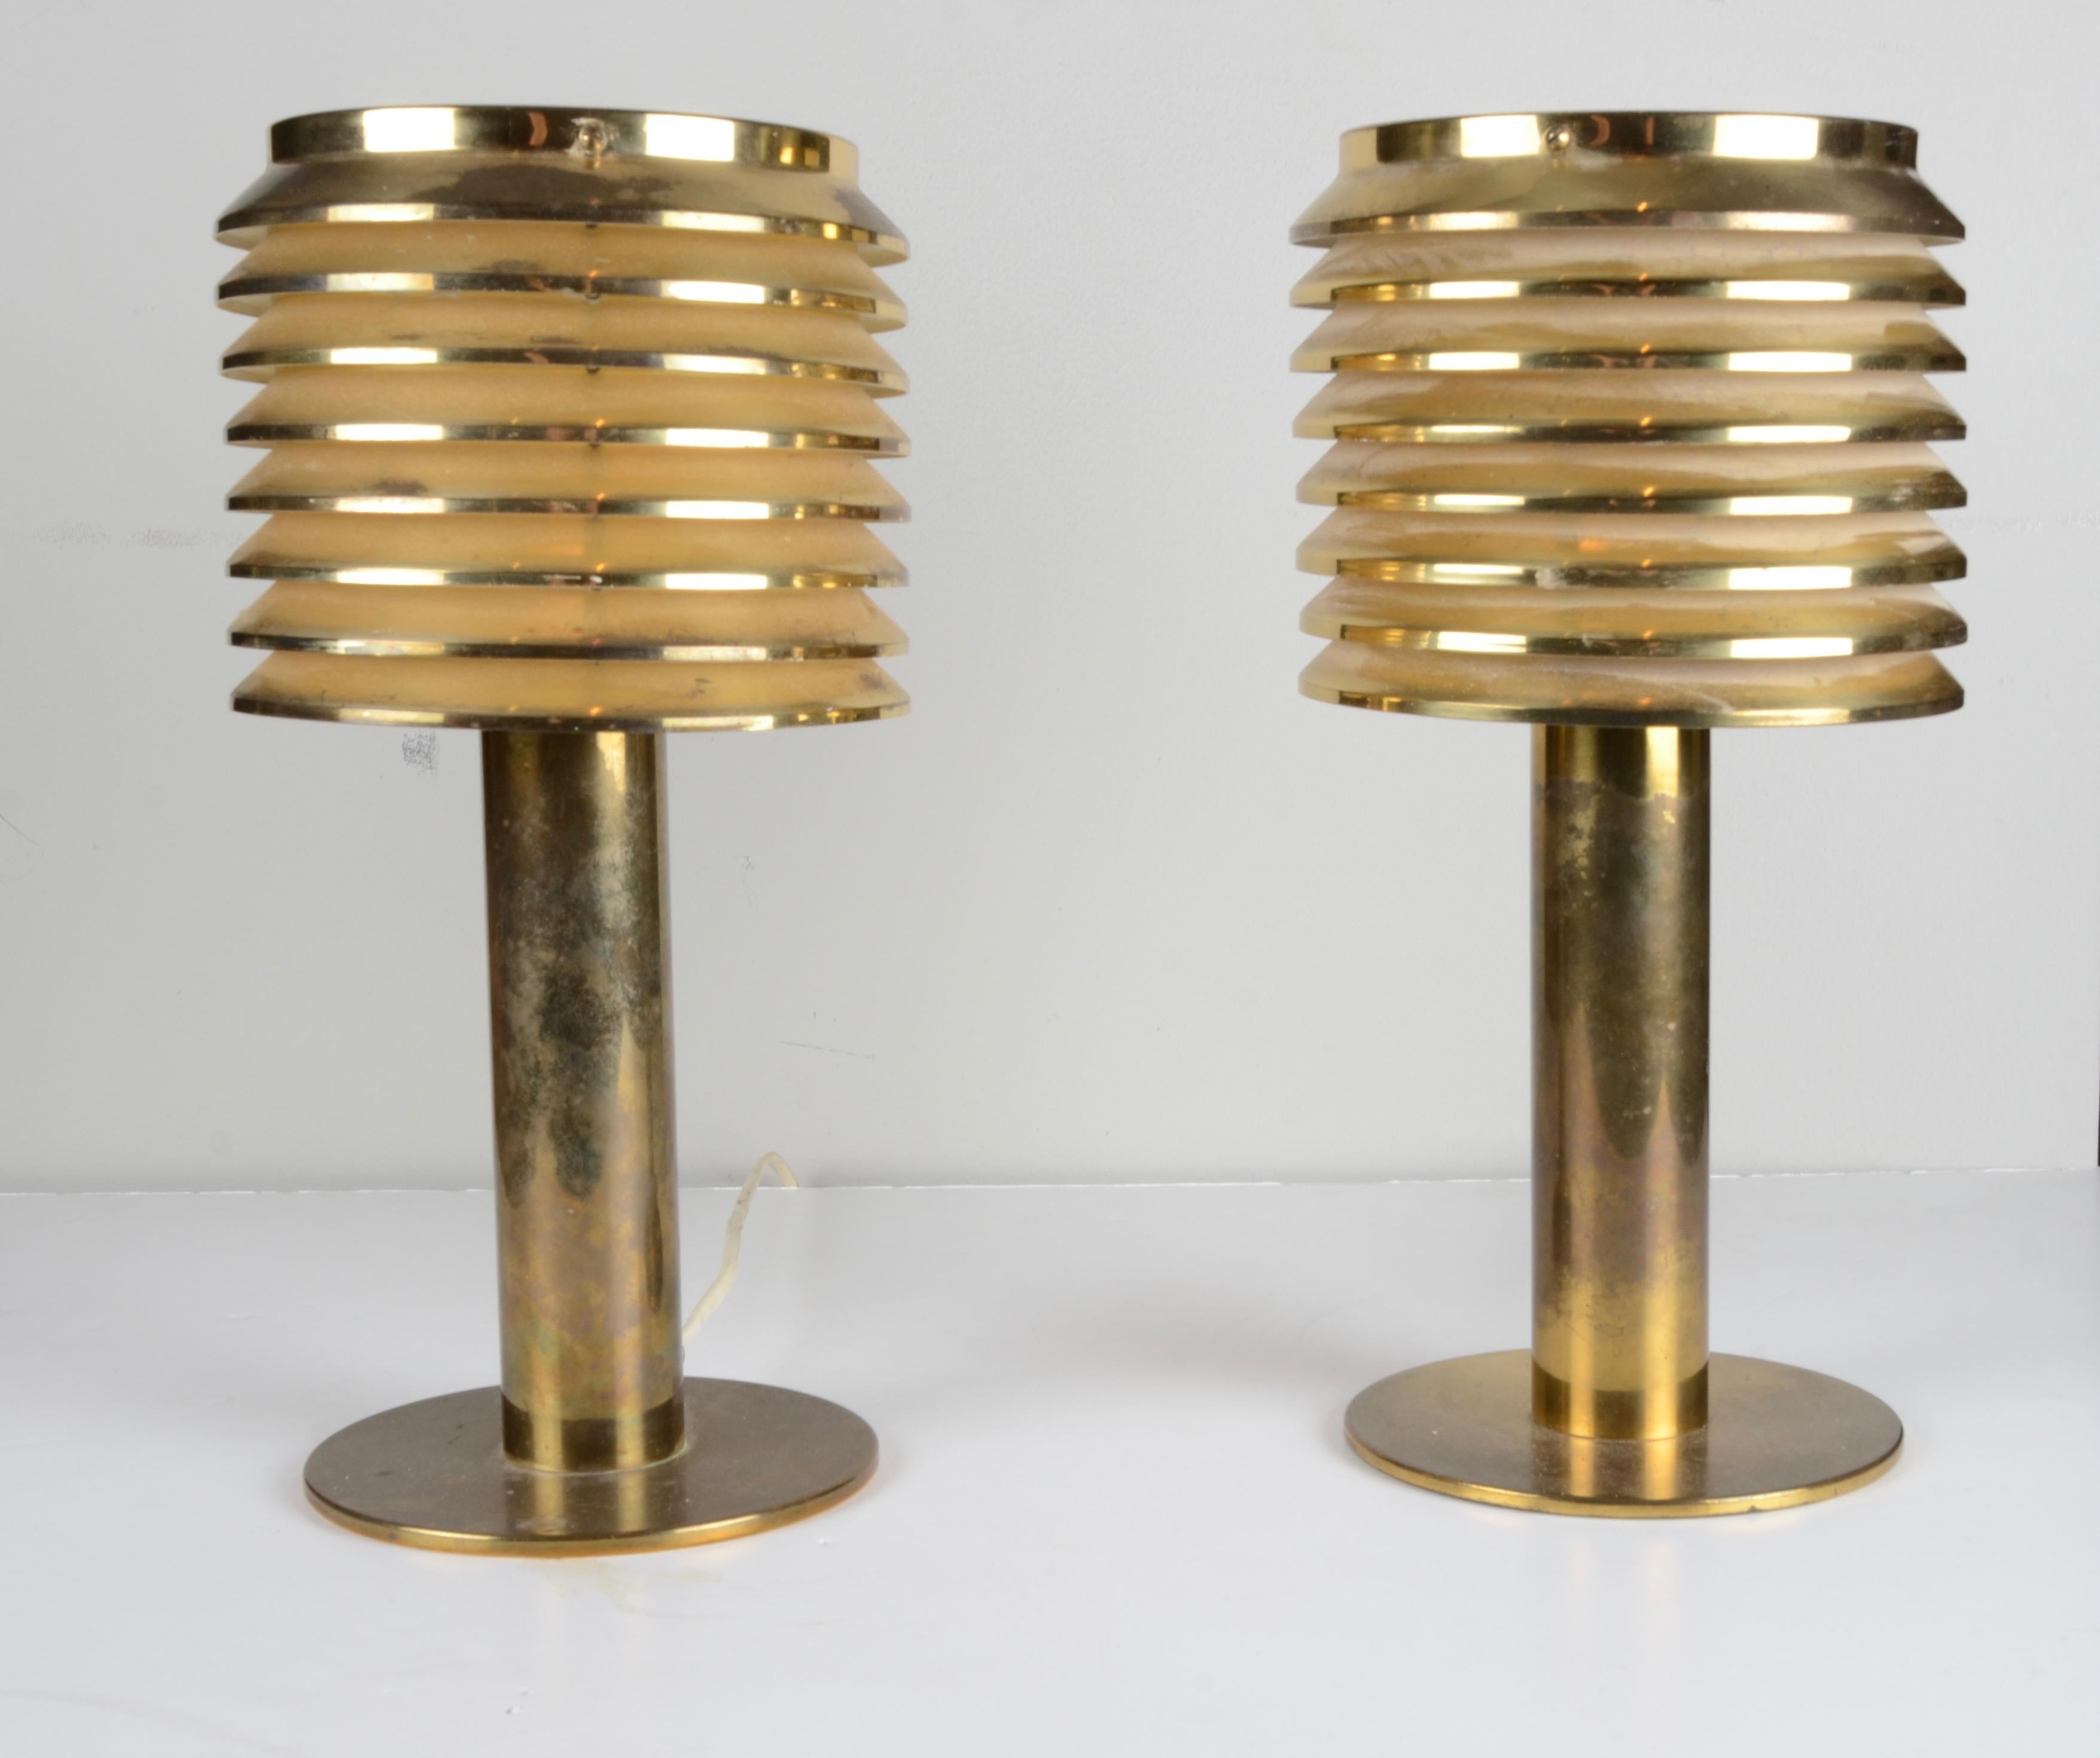 A pair of table lamps in brass, designed by Hans-Agne Jakobsson for Markaryd. Sweden mid-1900s.